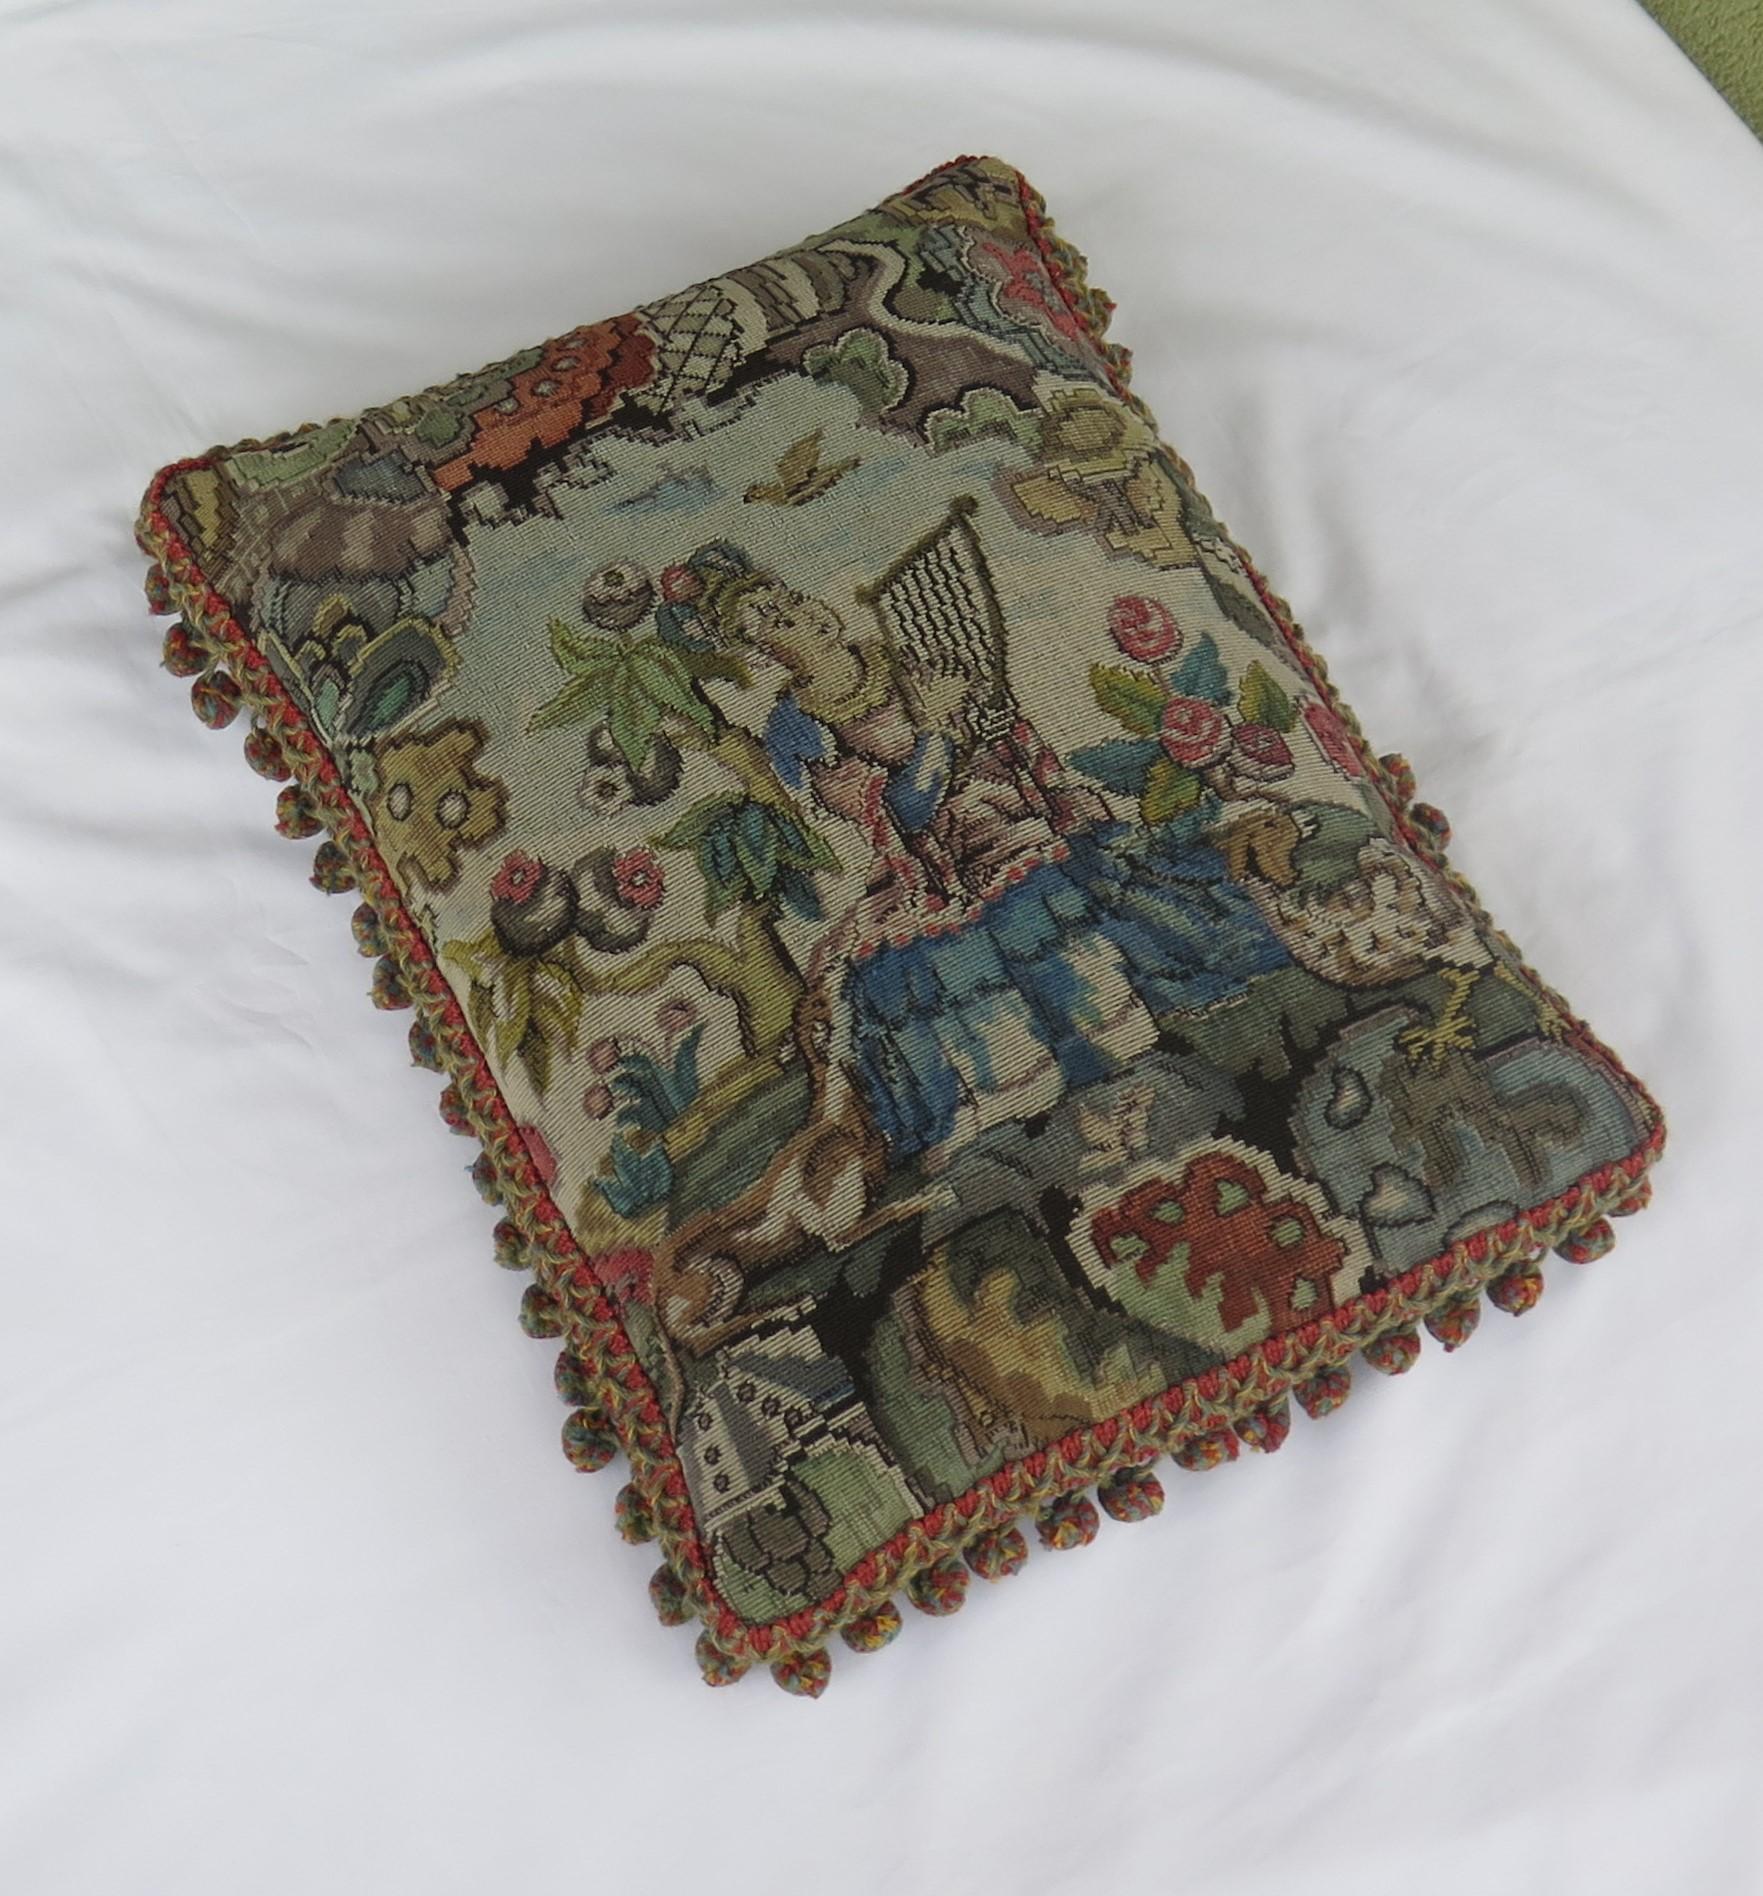 This is a beautiful woven tapestry pillow or cushion depicting a Lady playing a Lyre in a woodland setting, all in the Aubusson style, with a pom pom wool fringe to the outer edge, which we date to the second half of the 19th century.

The